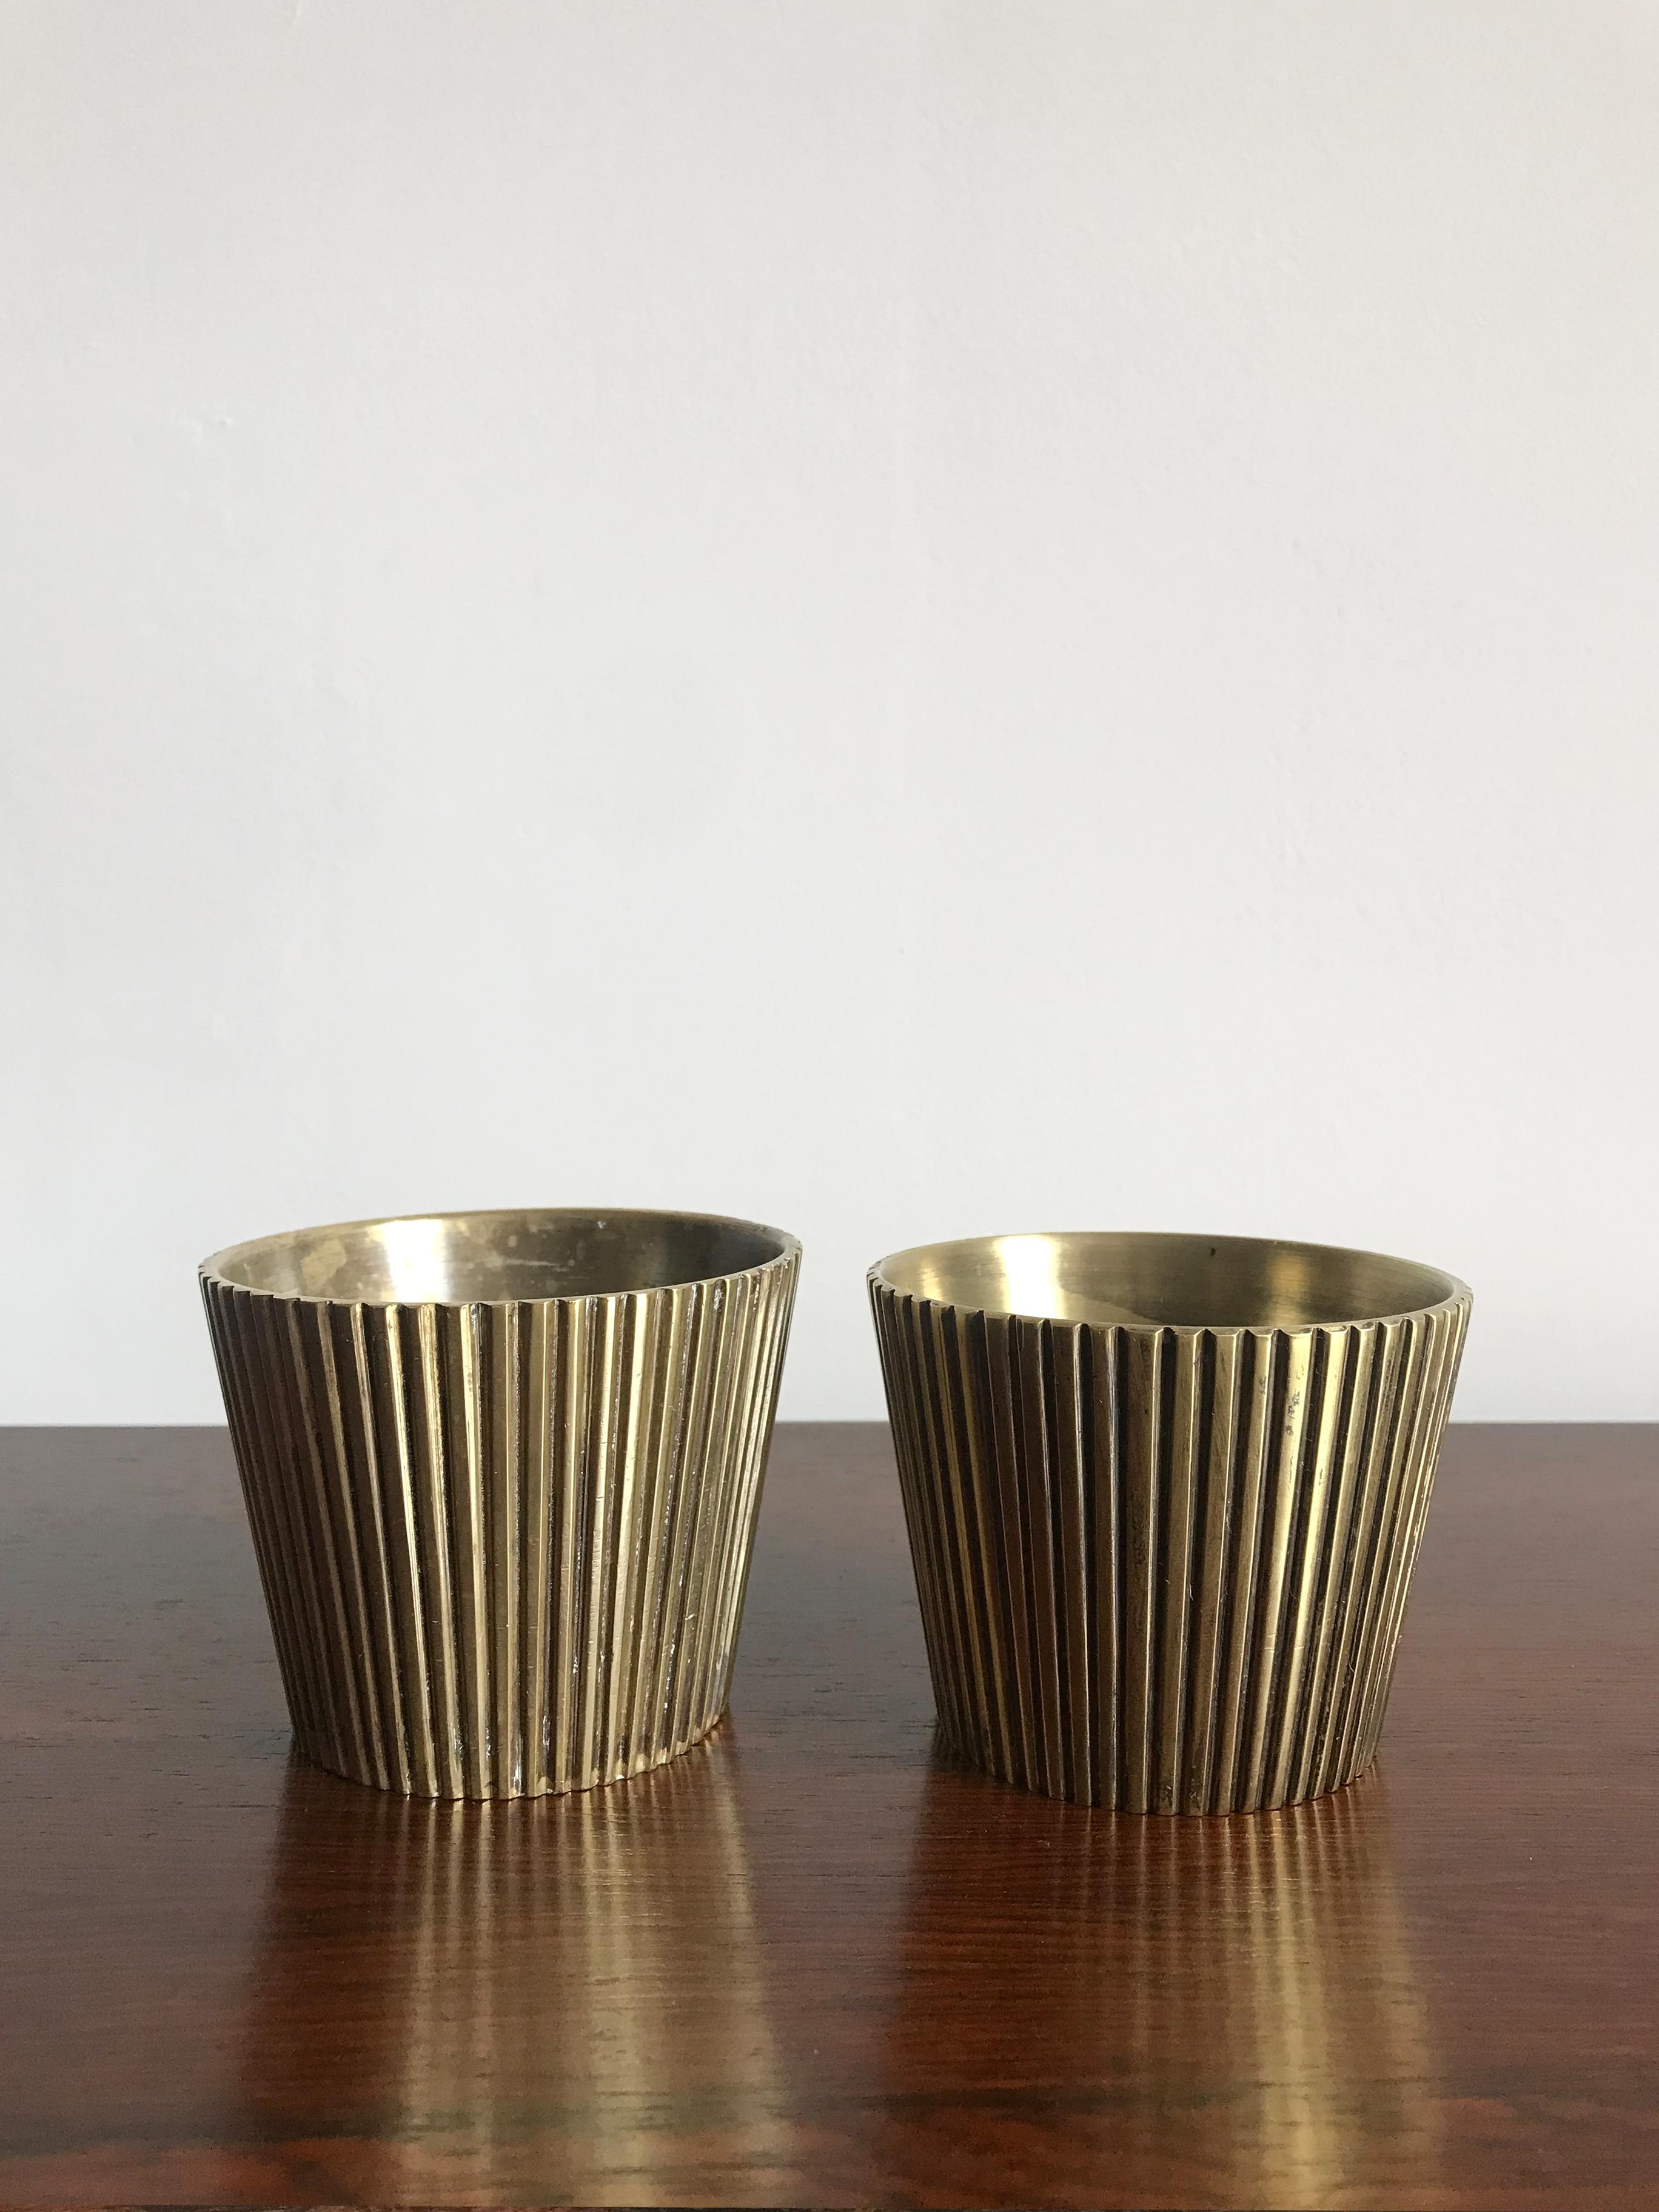 Scandinavian midcentury modern design vases set in solid brass produed in Denmark, circa 1950s.
Please note that the items are original of the period and this shows normal signs of age and use.